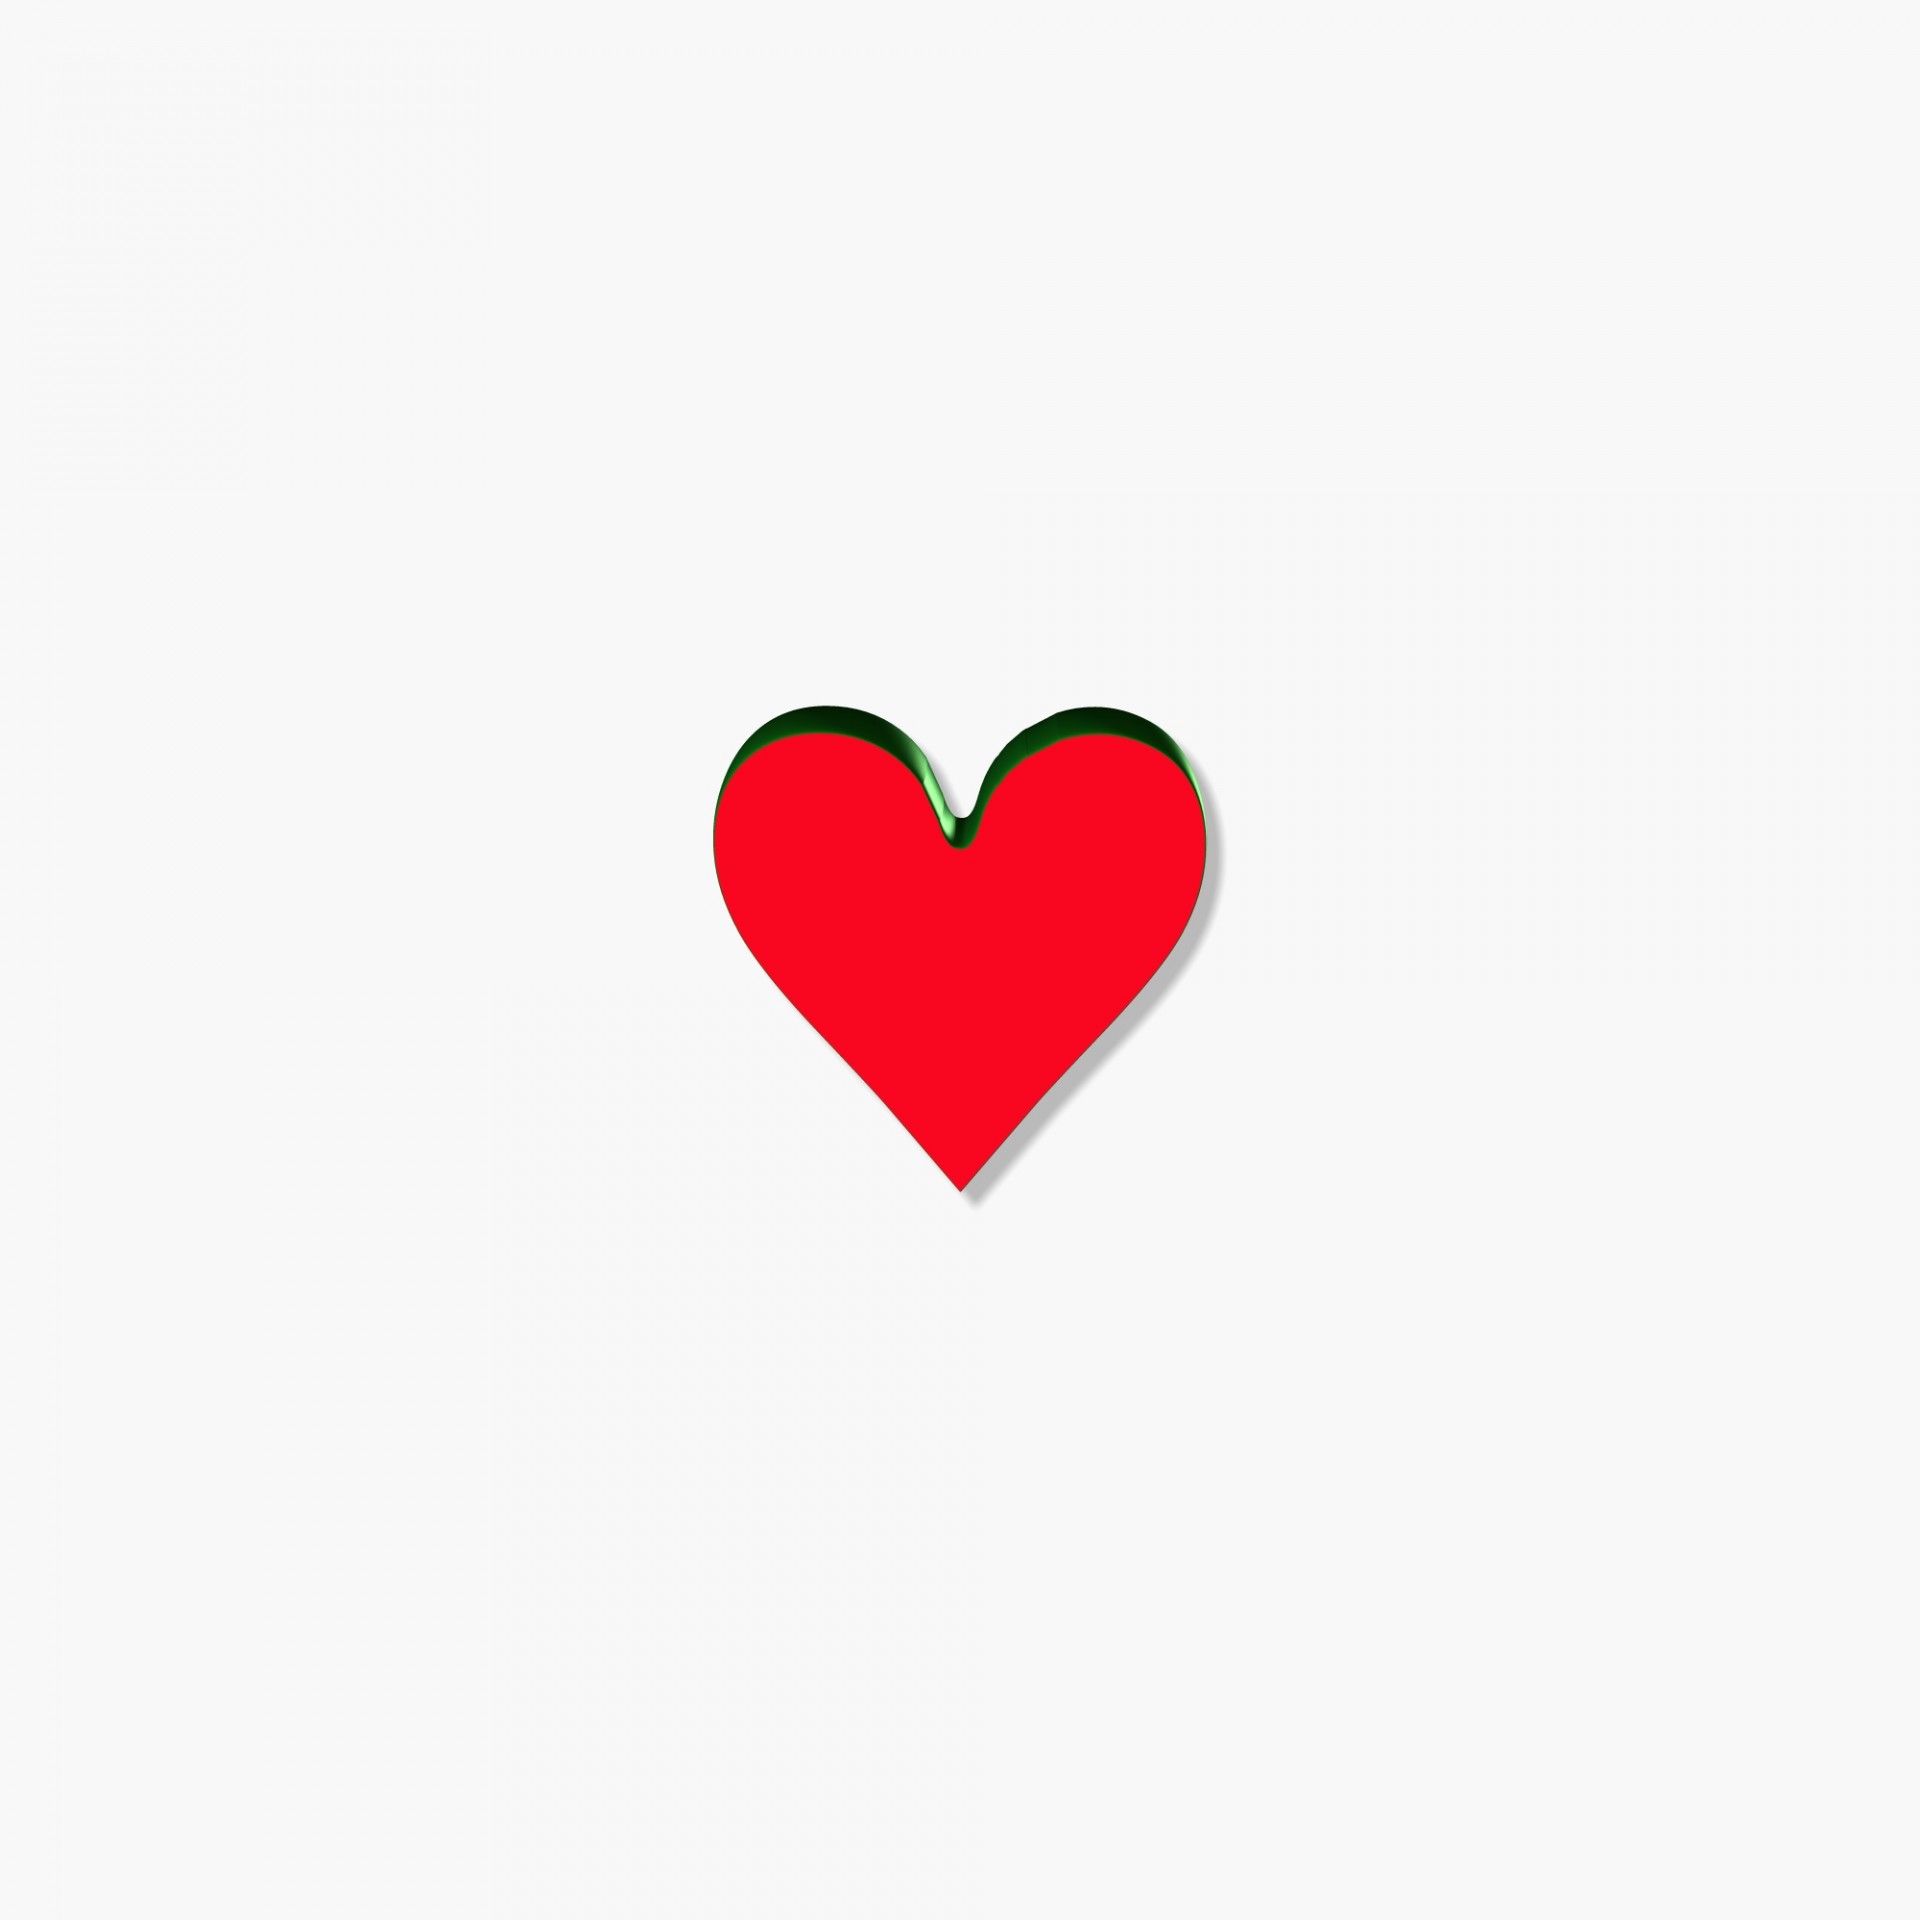 Simple Red Heart Images - Public Domain Pictures - Page 1